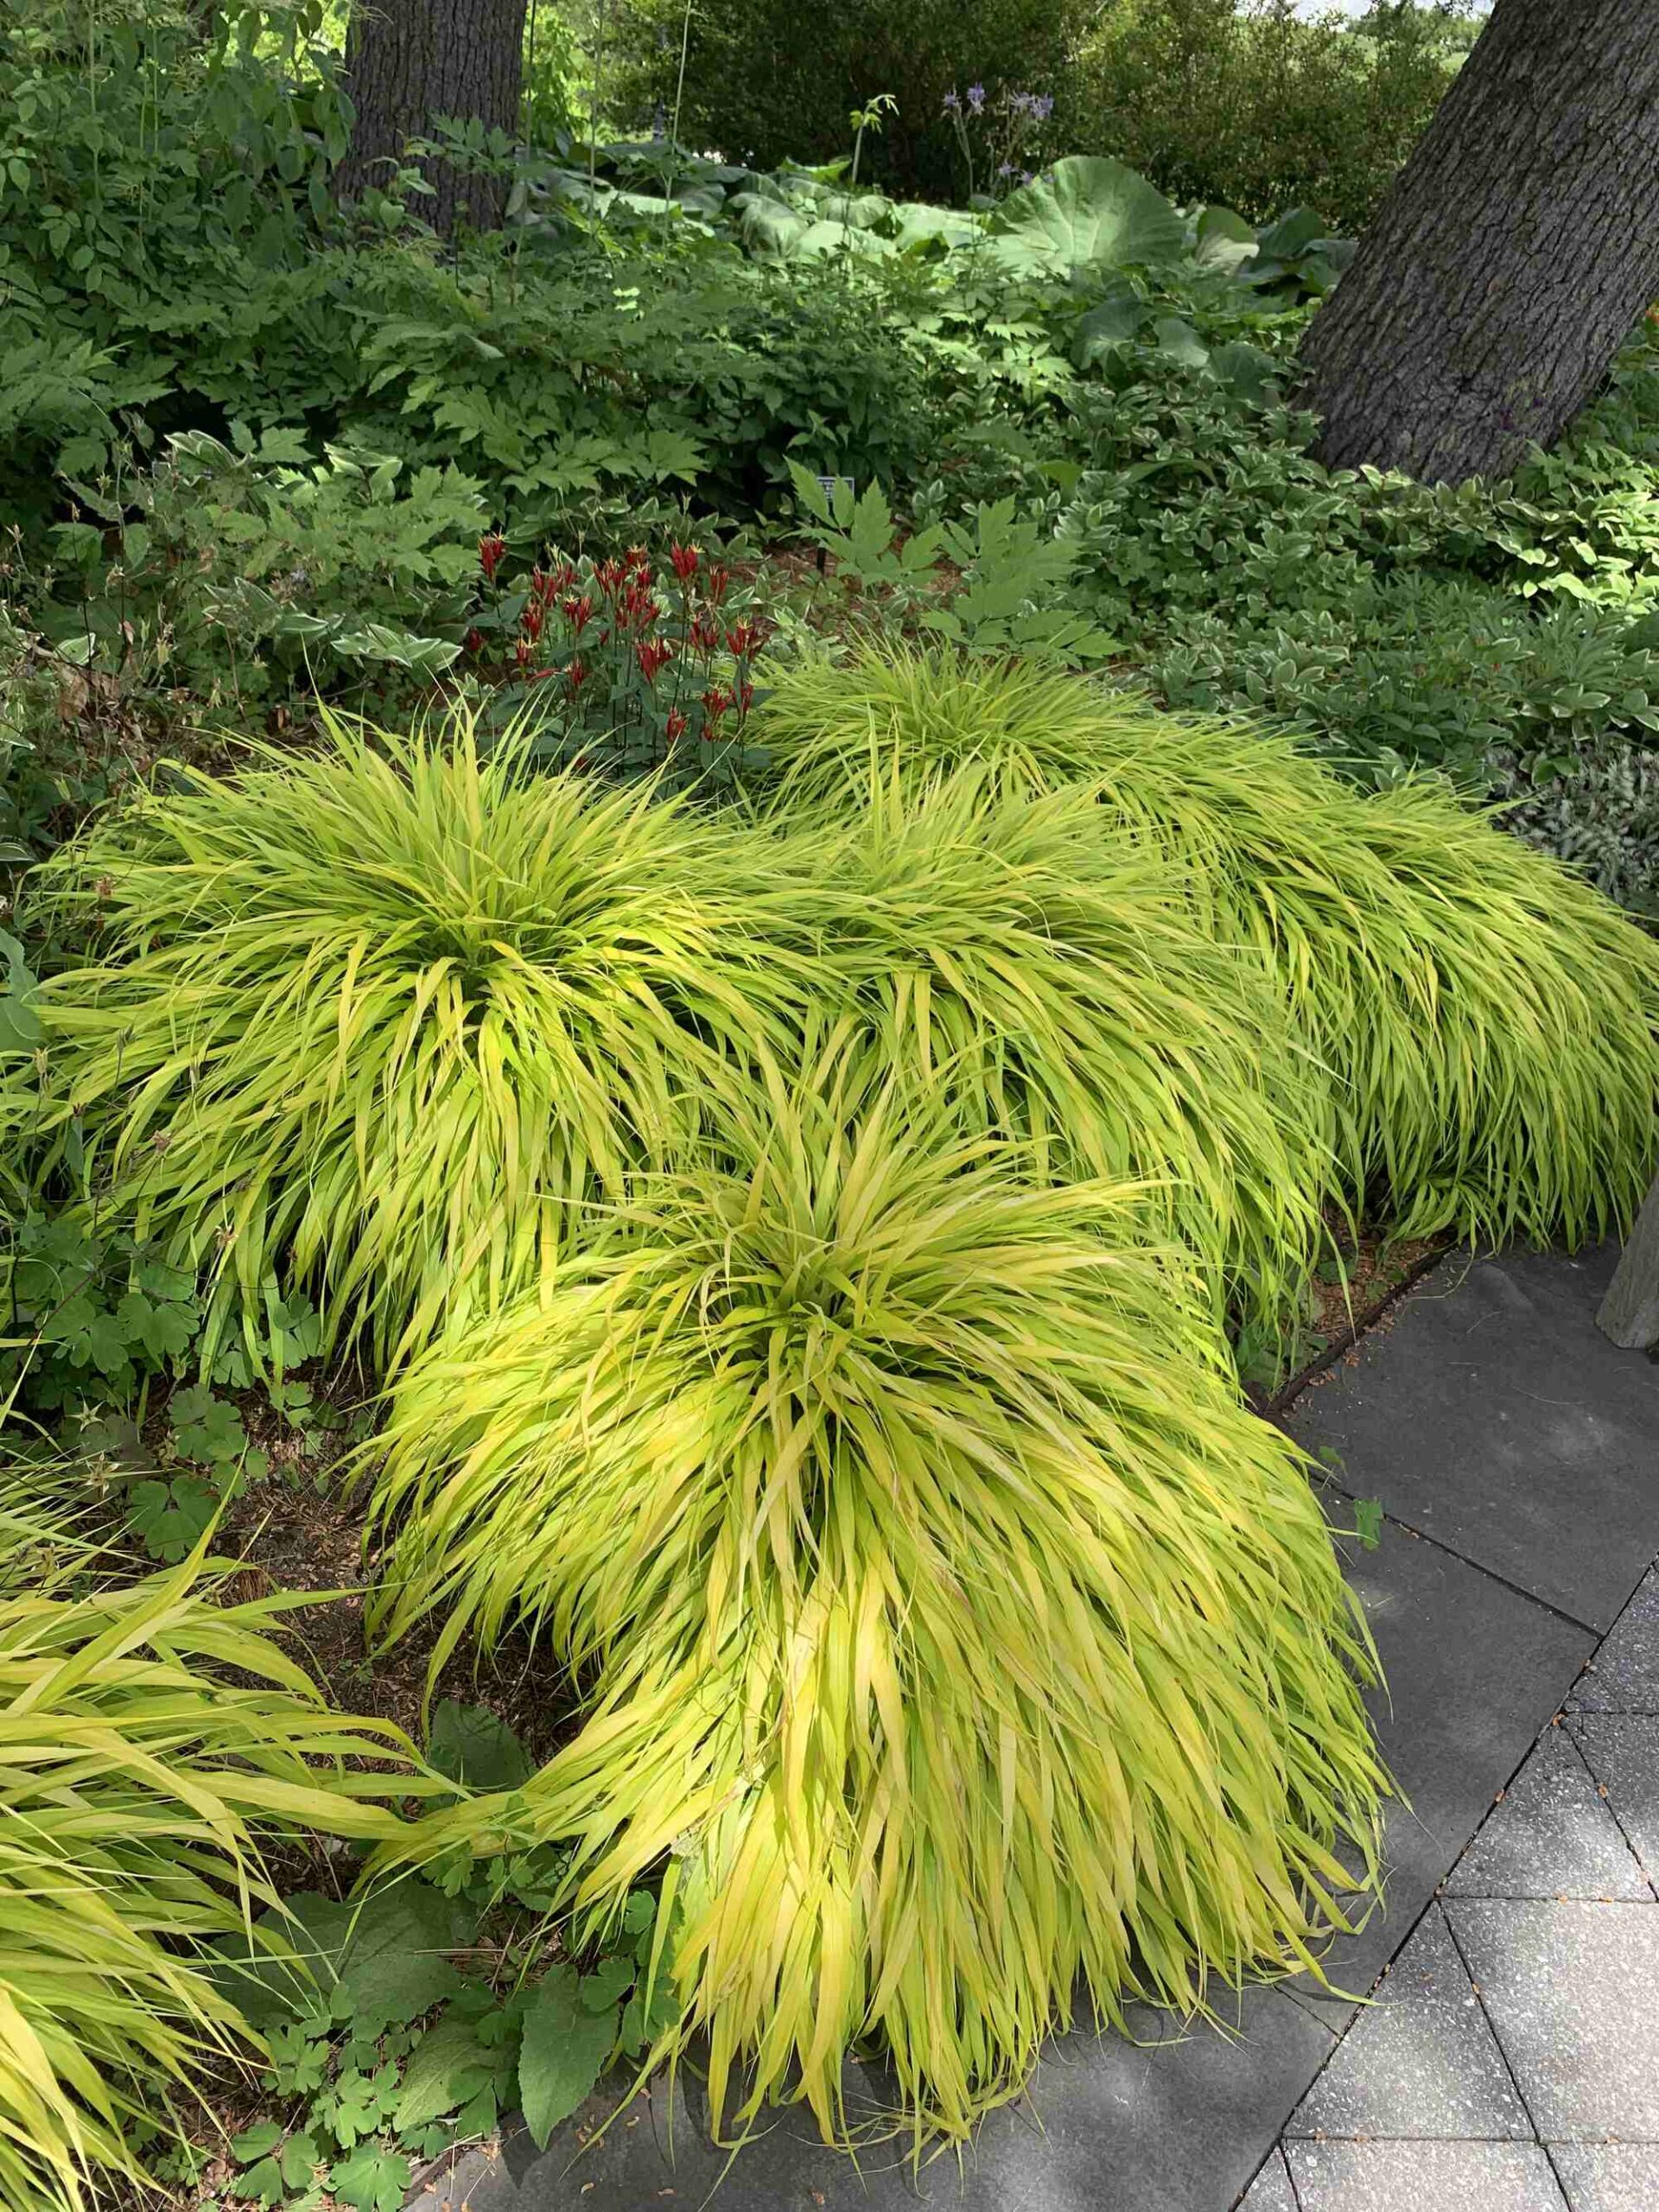 Photograph of Japanese forest grass. This ornamental grass looks very green and lush. Clumps of arching yellow-green leaves radiate from a central point.